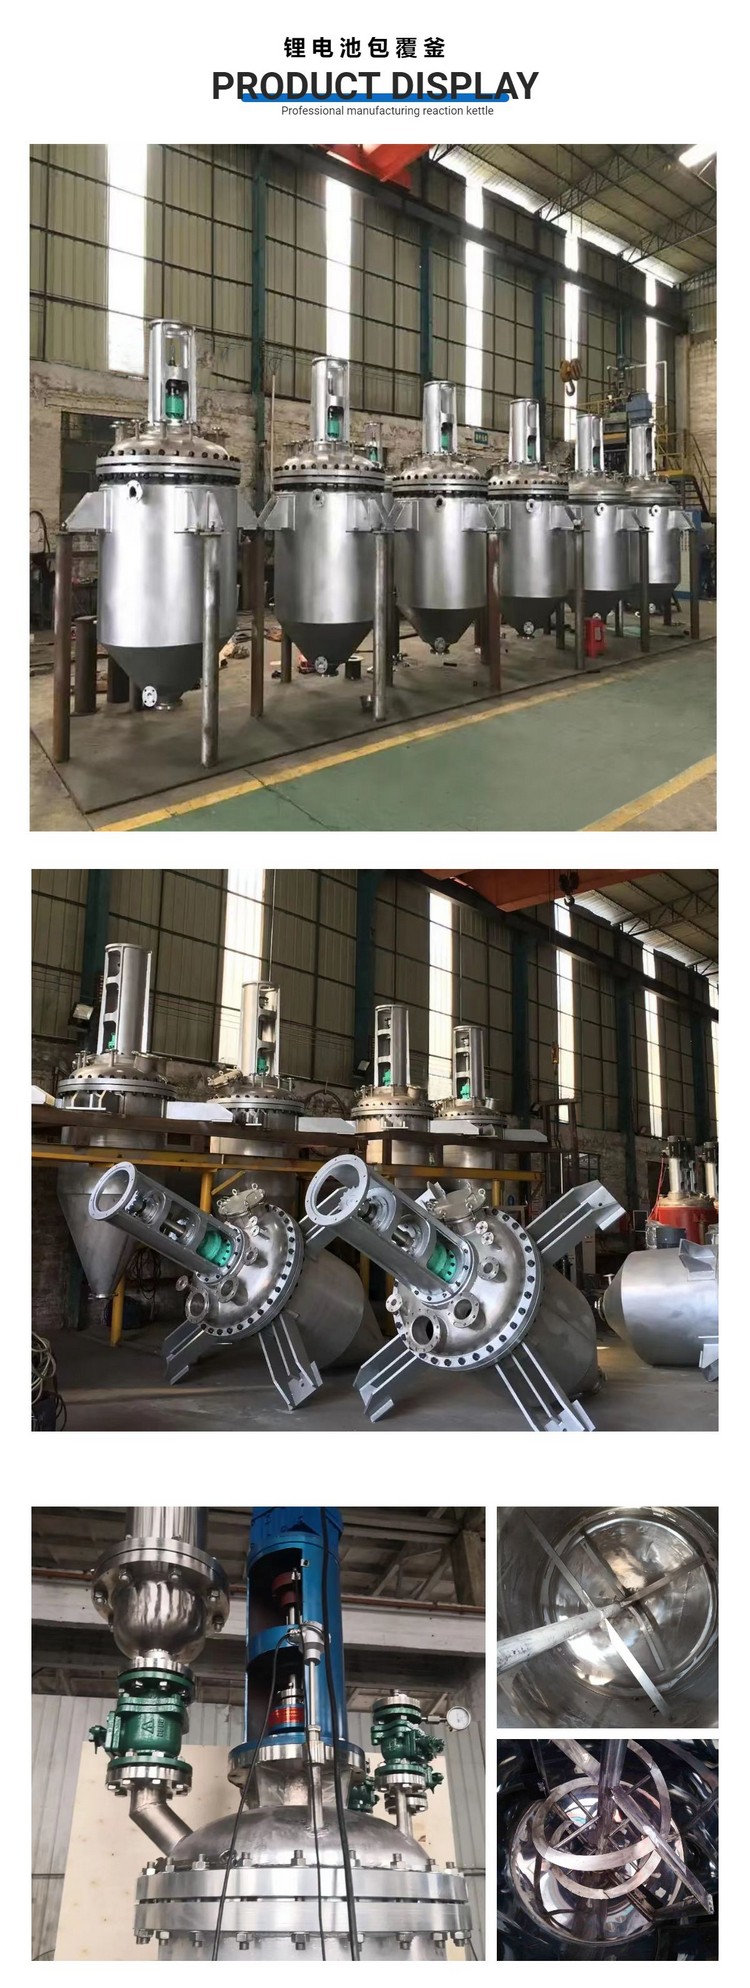 The high-temperature mechanical seal of the paint mixing tank is customized according to needs, and the specifications for door-to-door delivery are complete